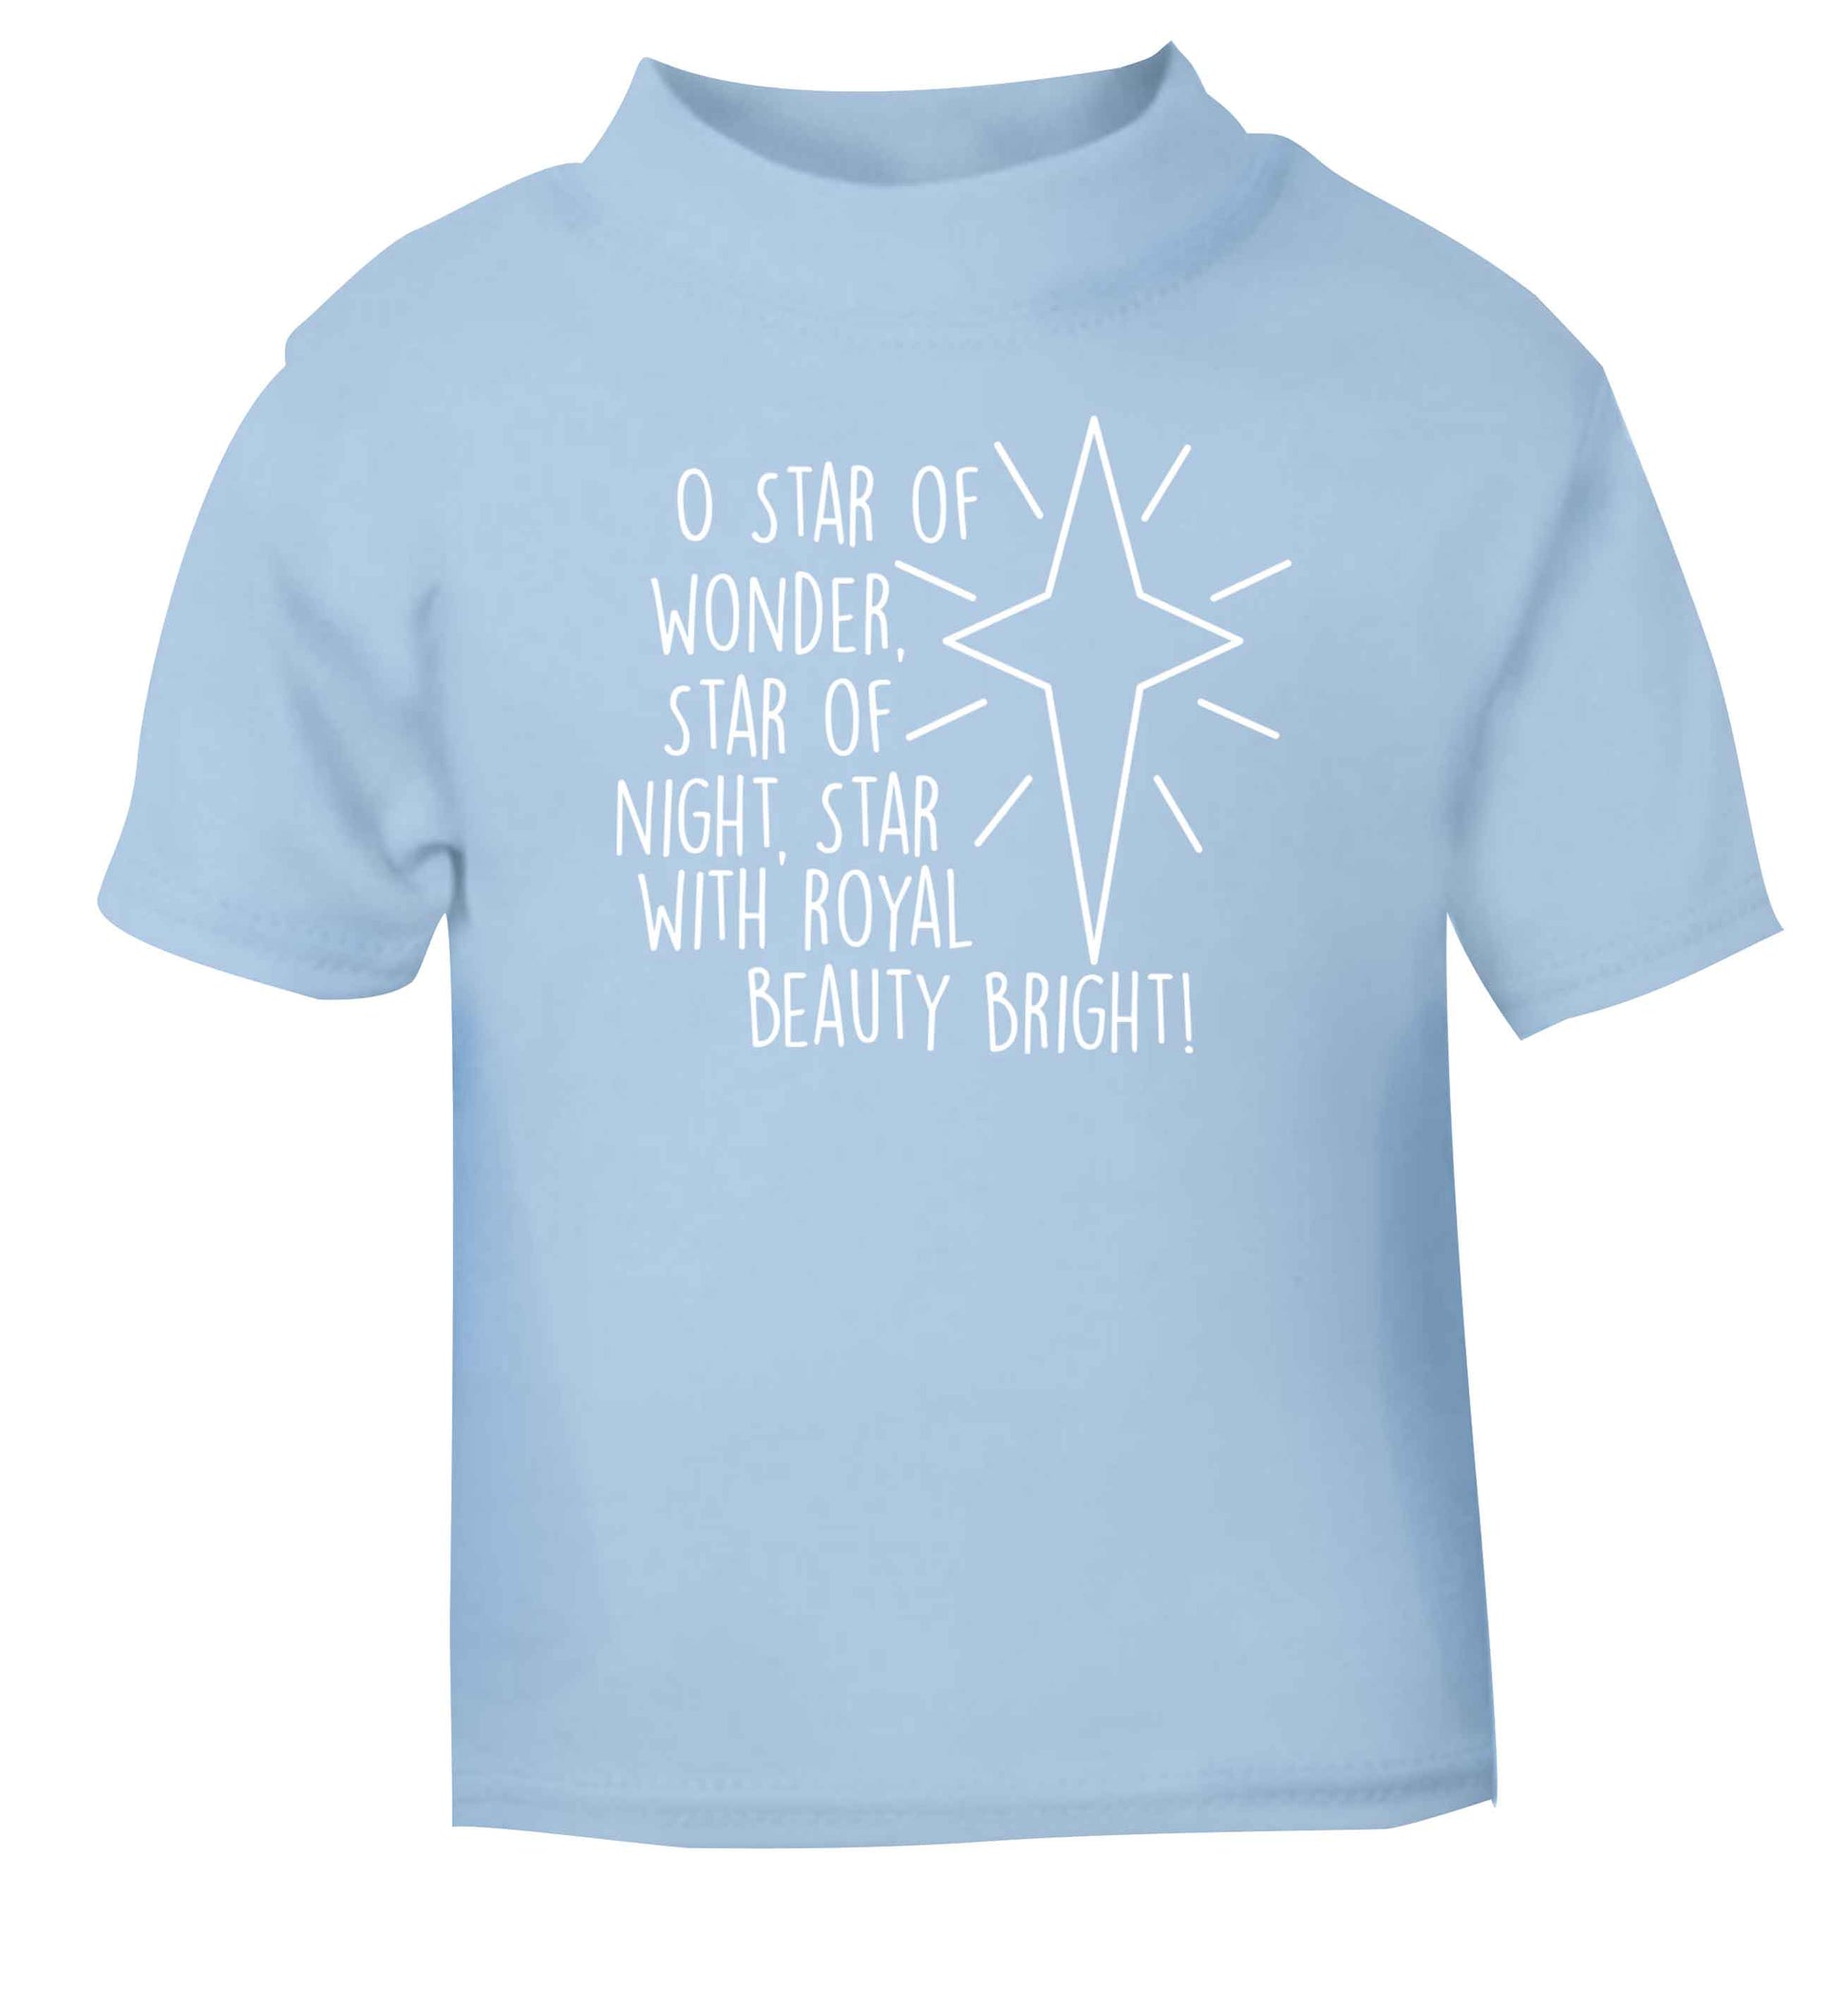 Oh star of wonder star of night, star with royal beauty bright light blue baby toddler Tshirt 2 Years